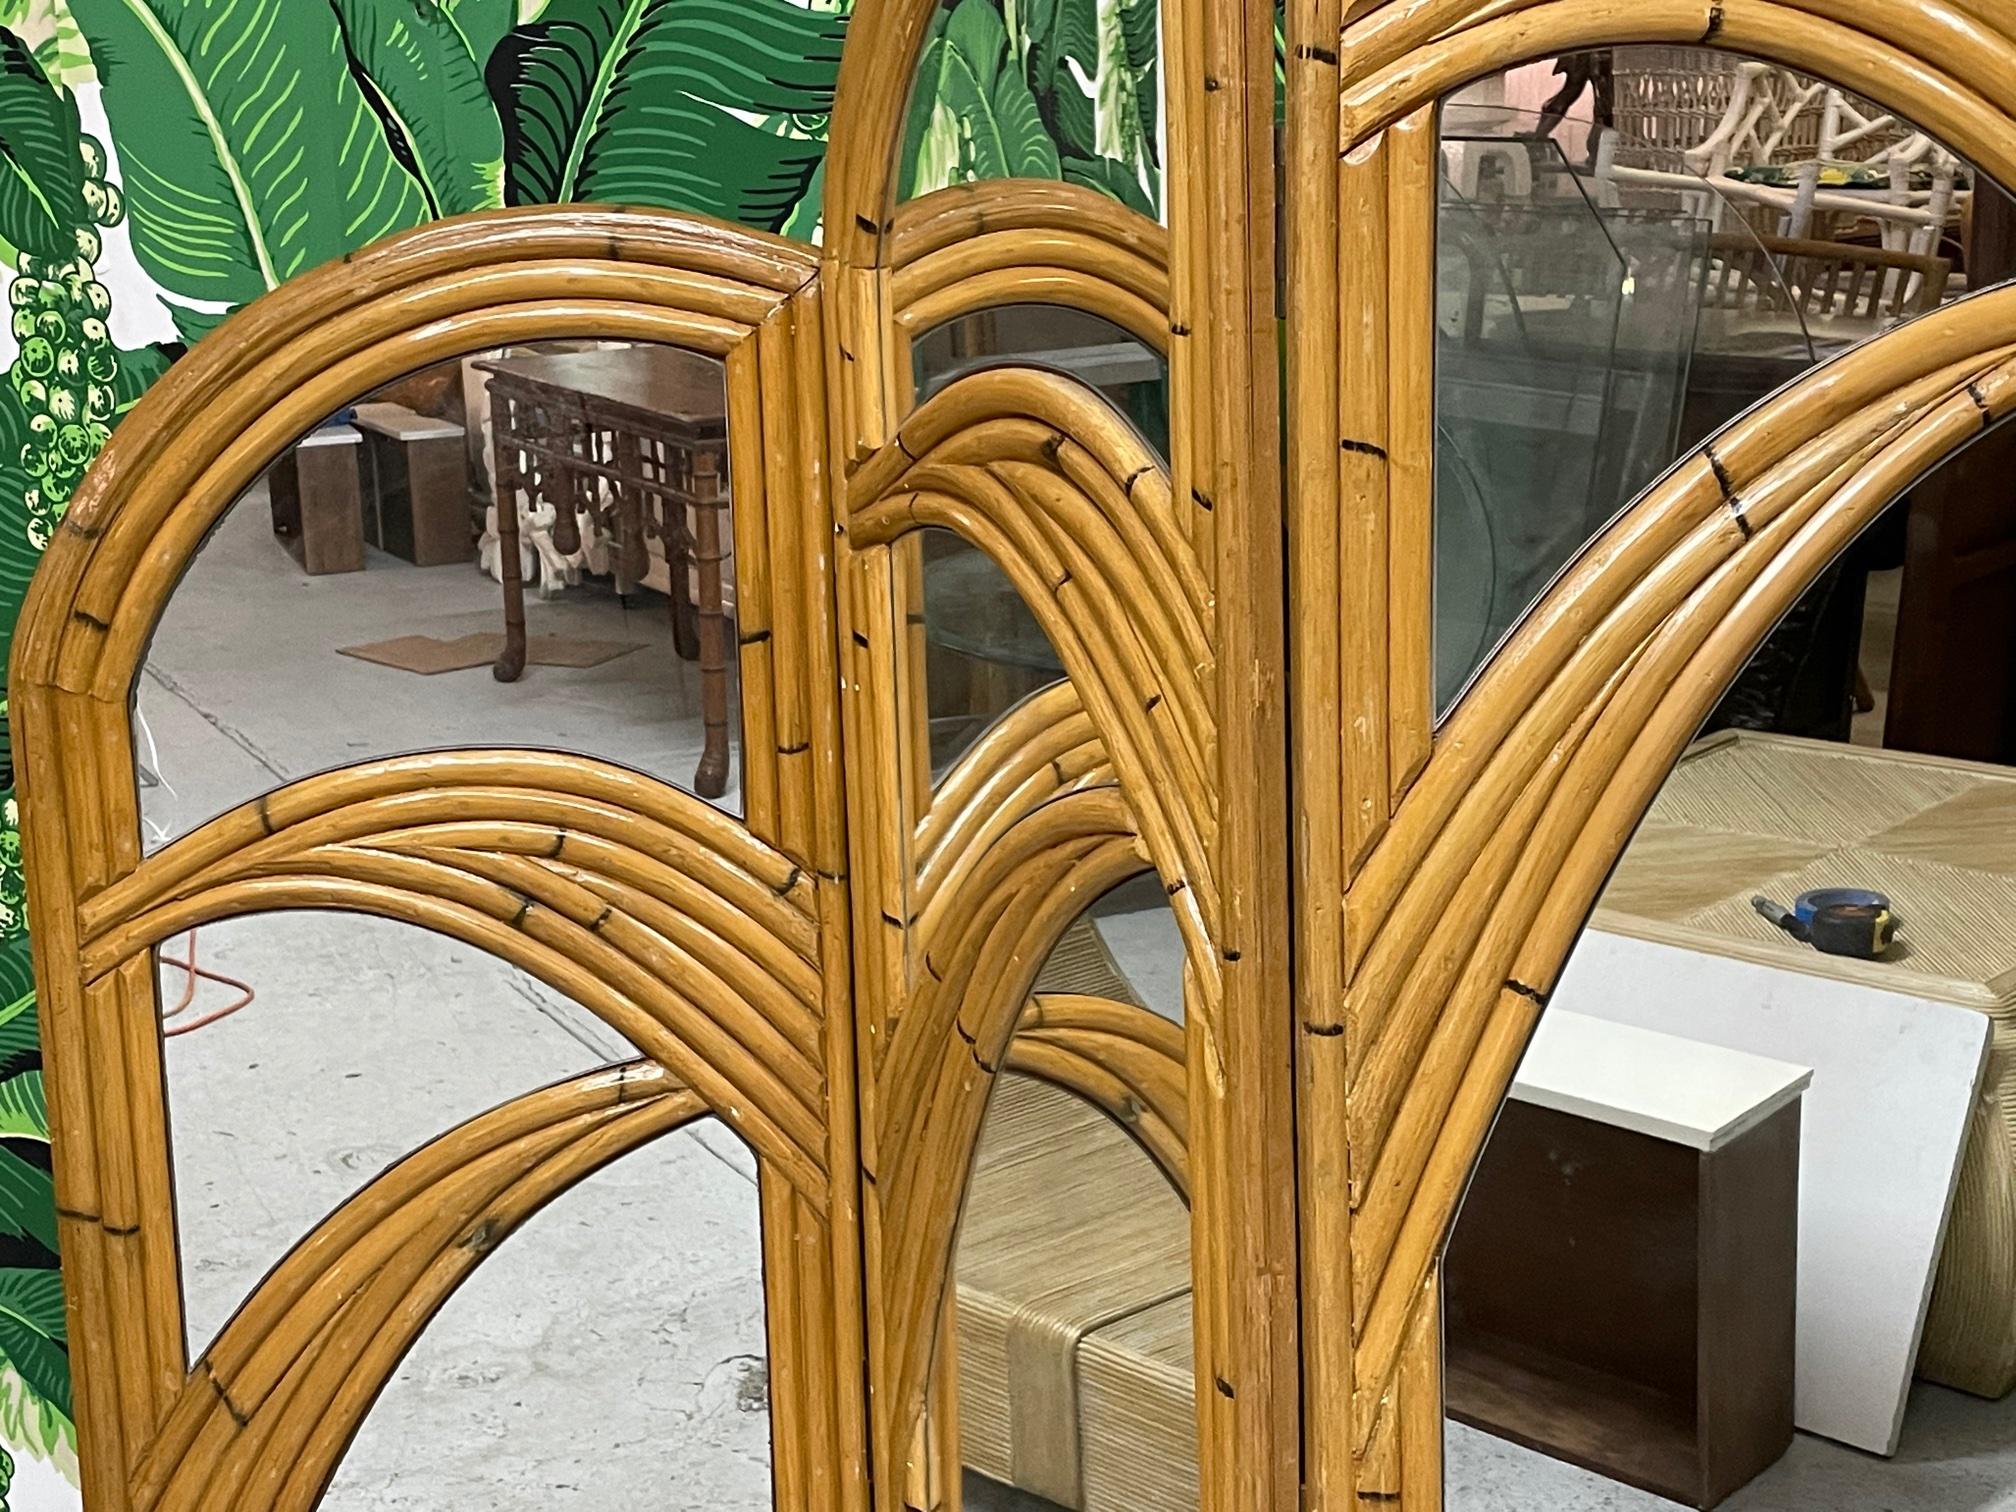 Pair of 3-panel room divider screens feature veneer of pencil reed rattan in a palm tree motif. Very good vintage condition with only minor imperfections consistent with age. Left screen is slightly lighter in color than right screen. Each panel